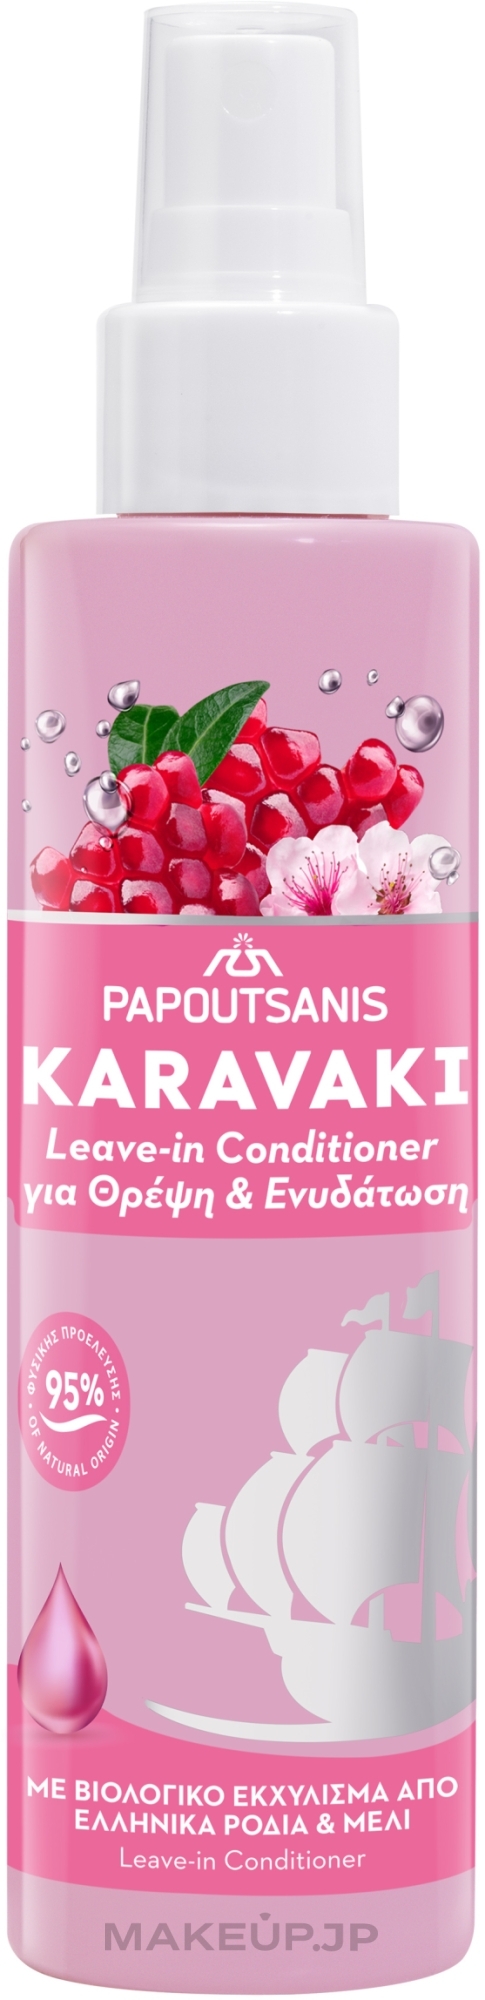 Leave-In Conditioner with Greek Pomegranate & Honey Extracts - Papoutsanis Karavaki Leave-in Conditioner — photo 150 ml